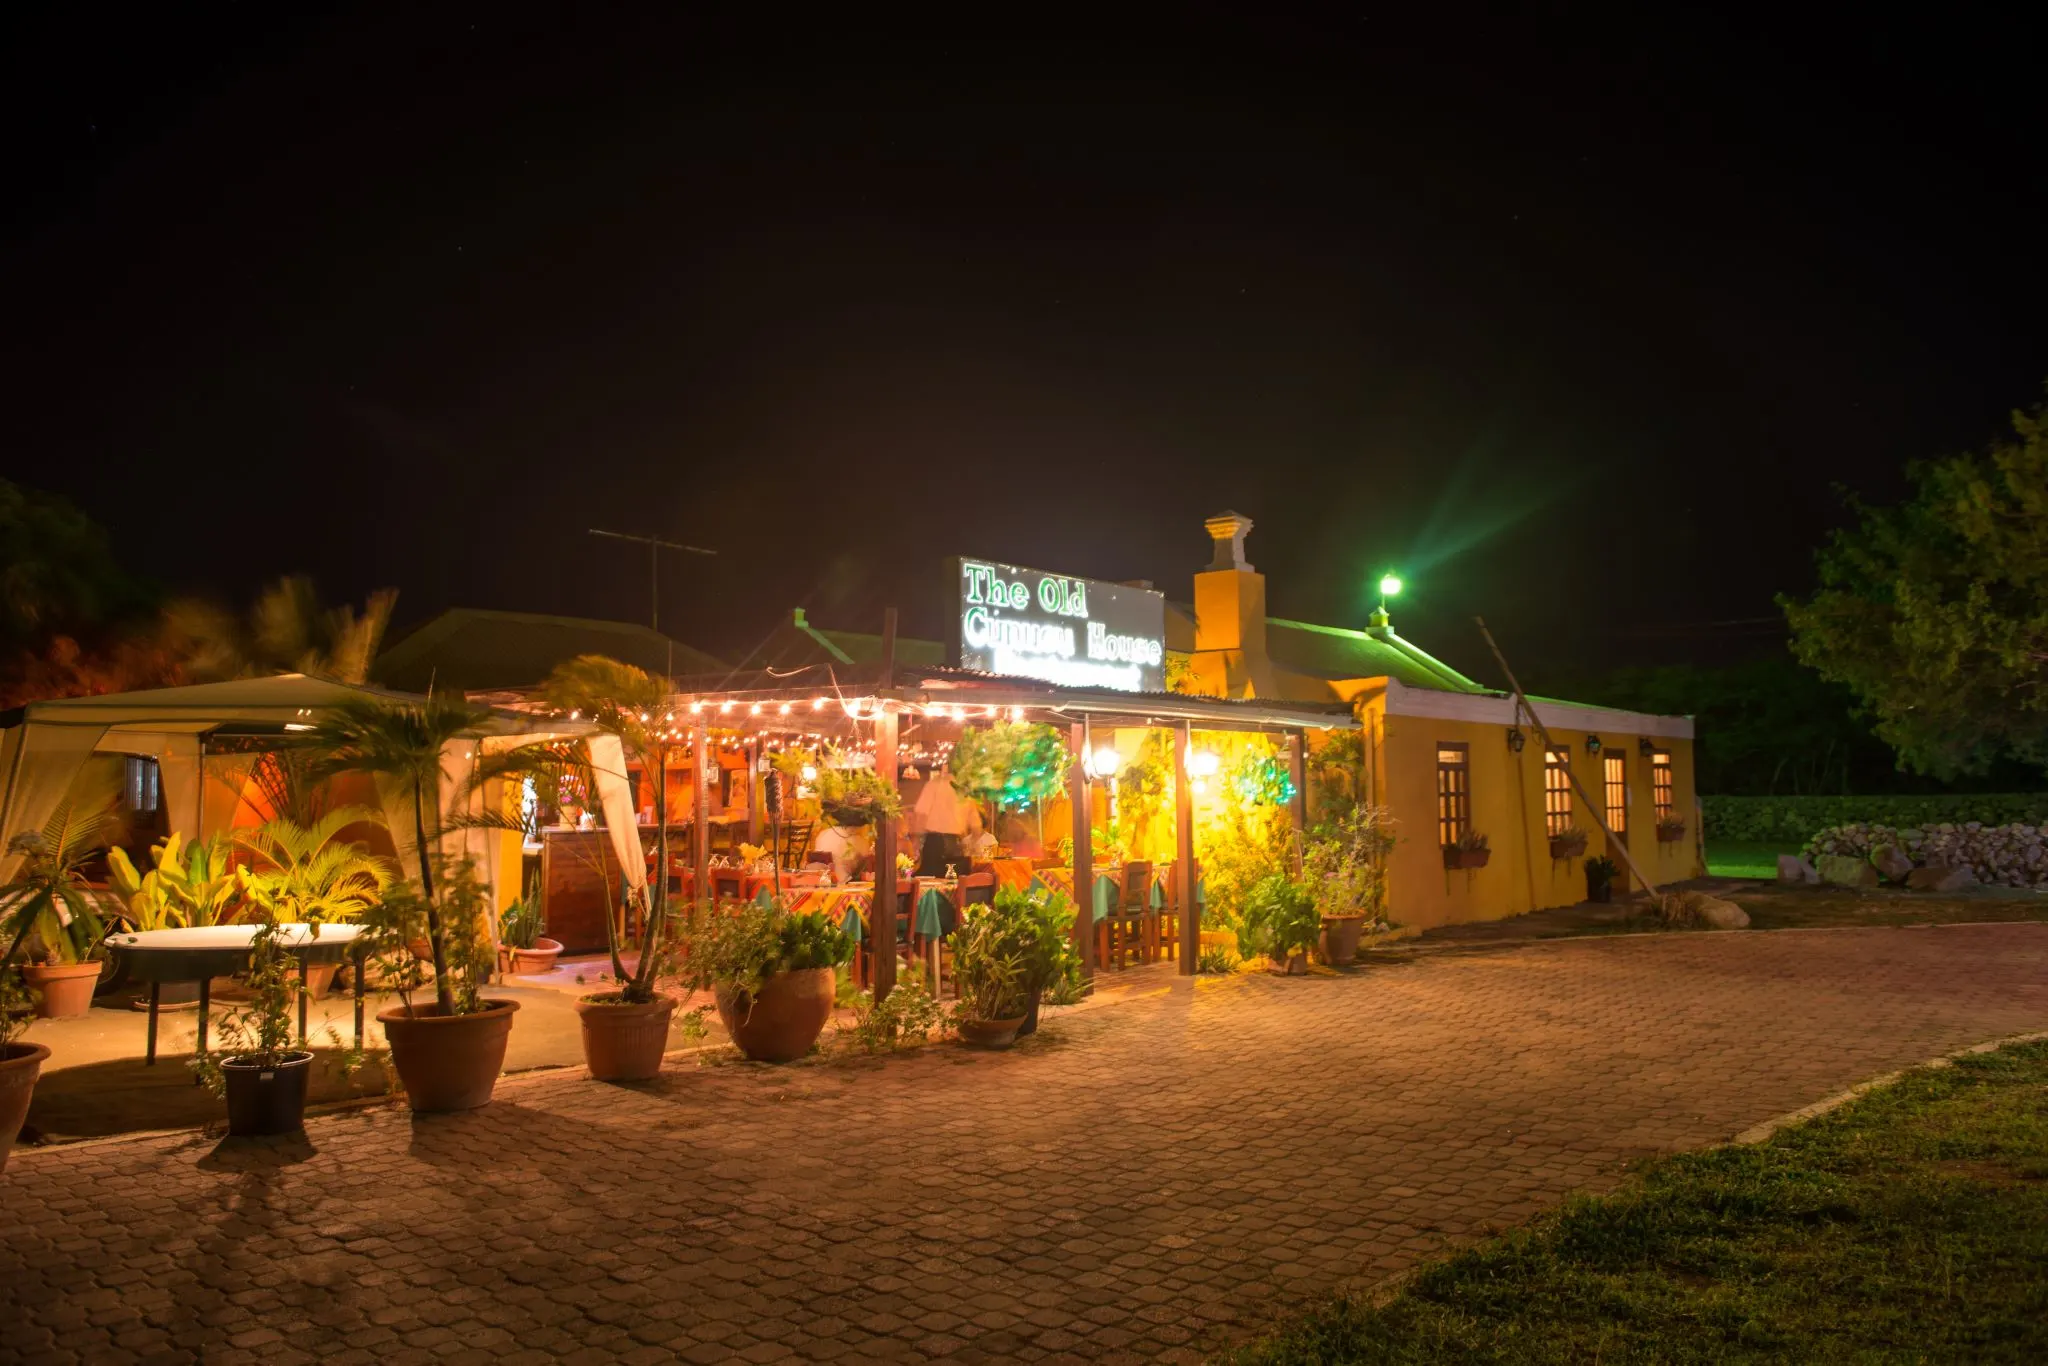 The bright lights of The Old Cunucu House Aruba at night, one of the best restaurants in Aruba, with bricks and potted plants on the front